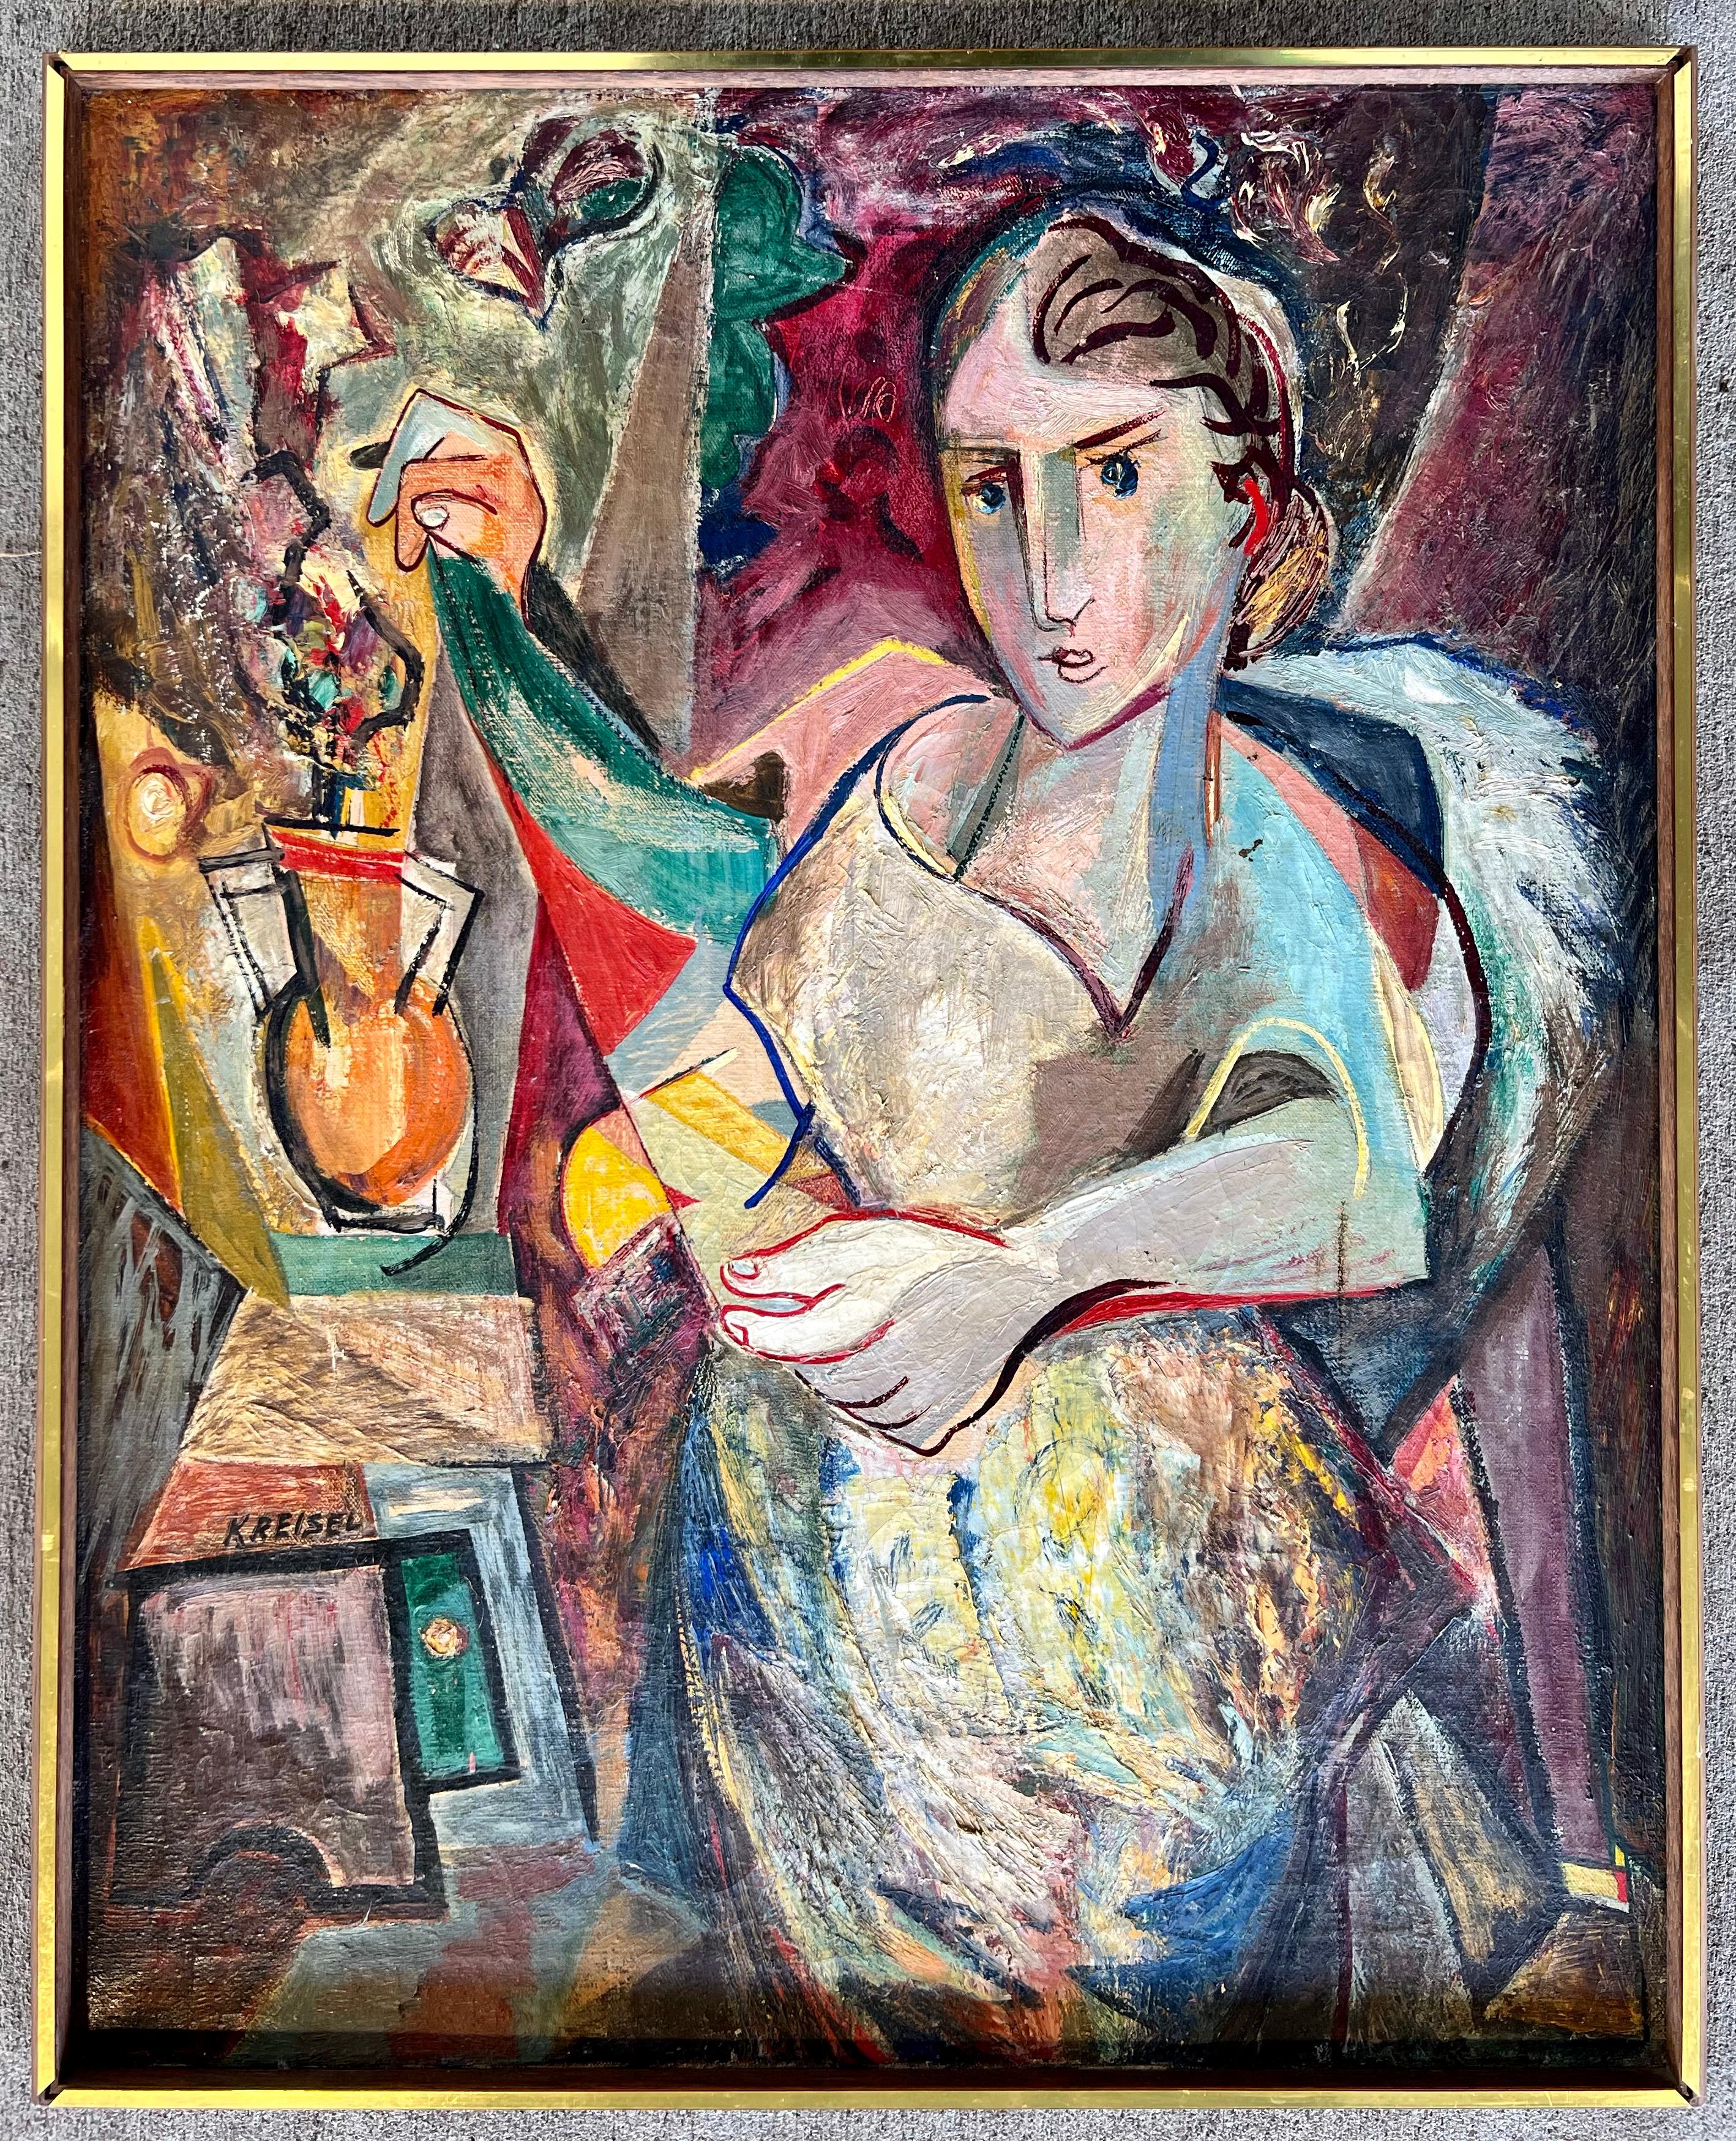 Cubist oil on canvas painting by Alexander Kreisel (American, 1901-1953). The frame is likely original to the painting. Signed in the center left.